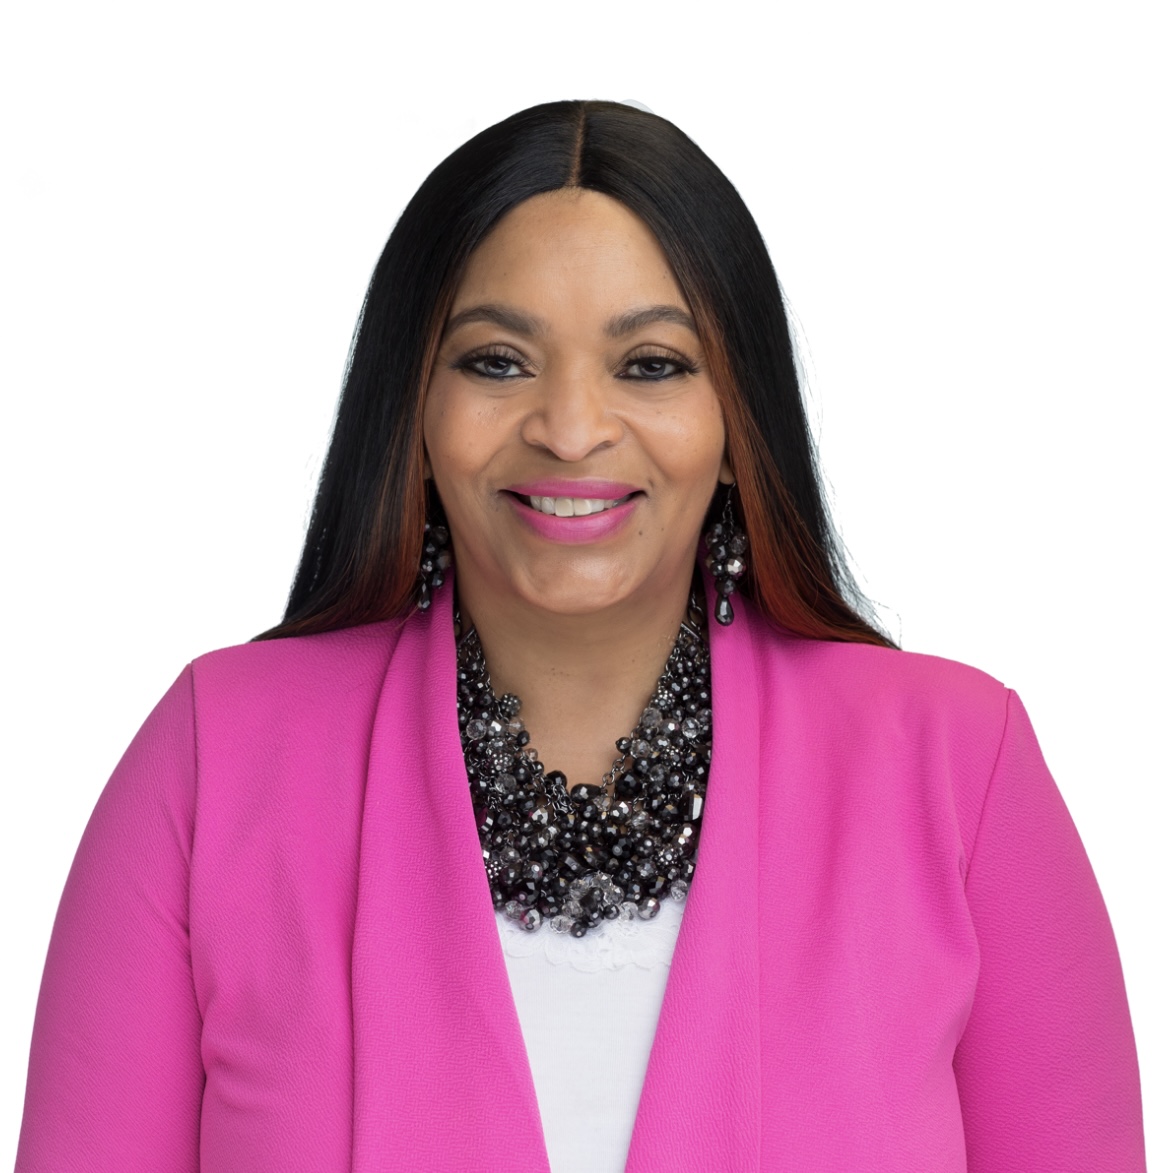 Elevate and Dominate in the marketplace with Angela “ALove” Lewis